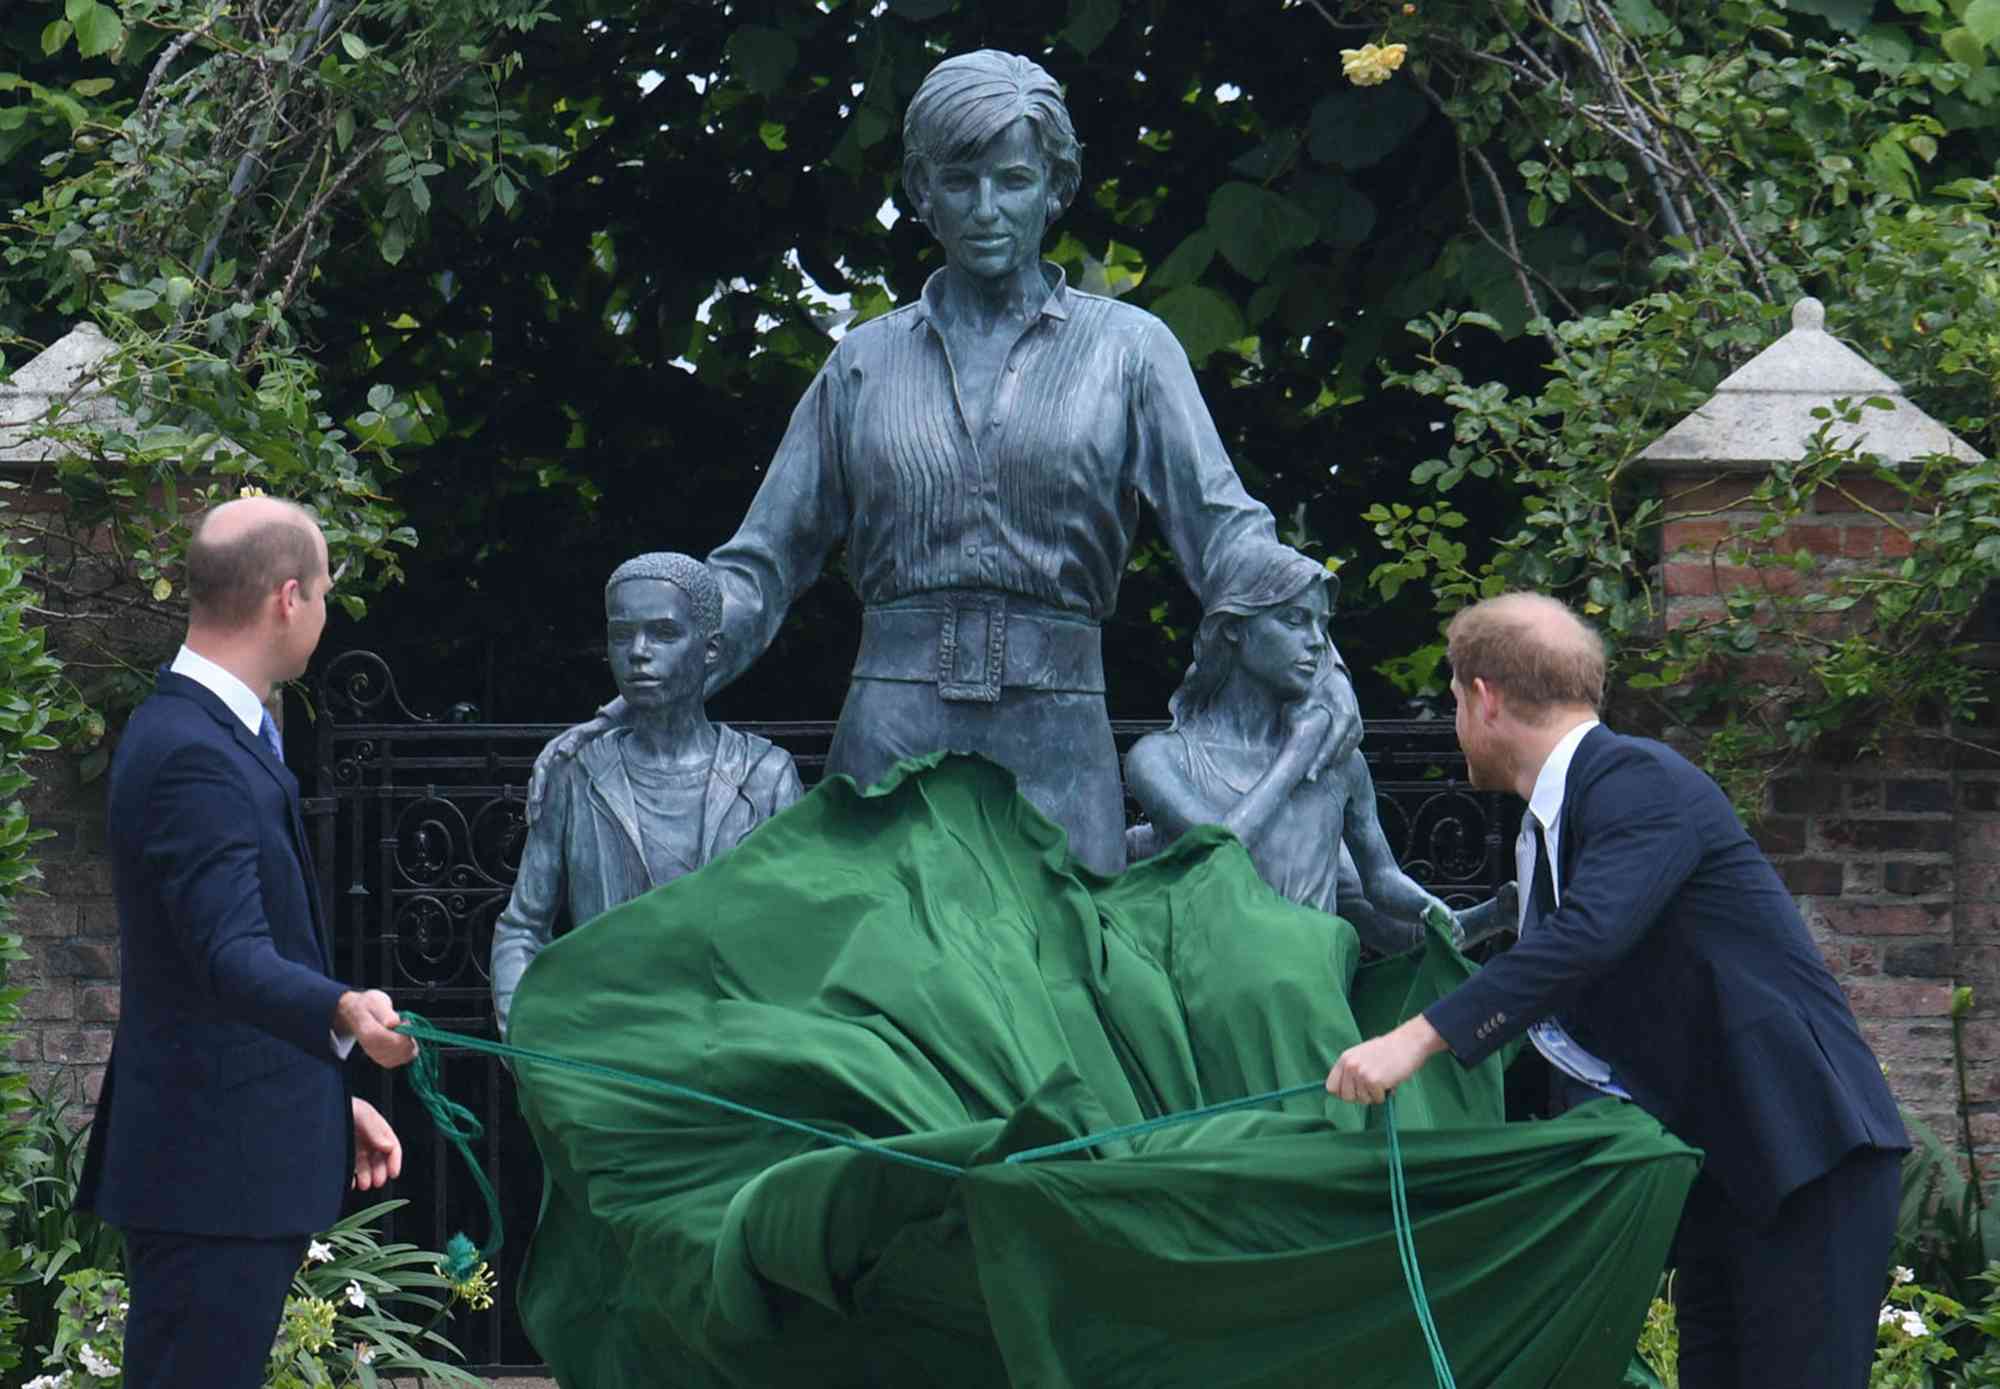 Prince William, Duke of Cambridge (L) and Britain's Prince Harry, Duke of Sussex unveil a statue of their mother, Princess Diana at The Sunken Garden in Kensington Palace, London on July 1, 2021